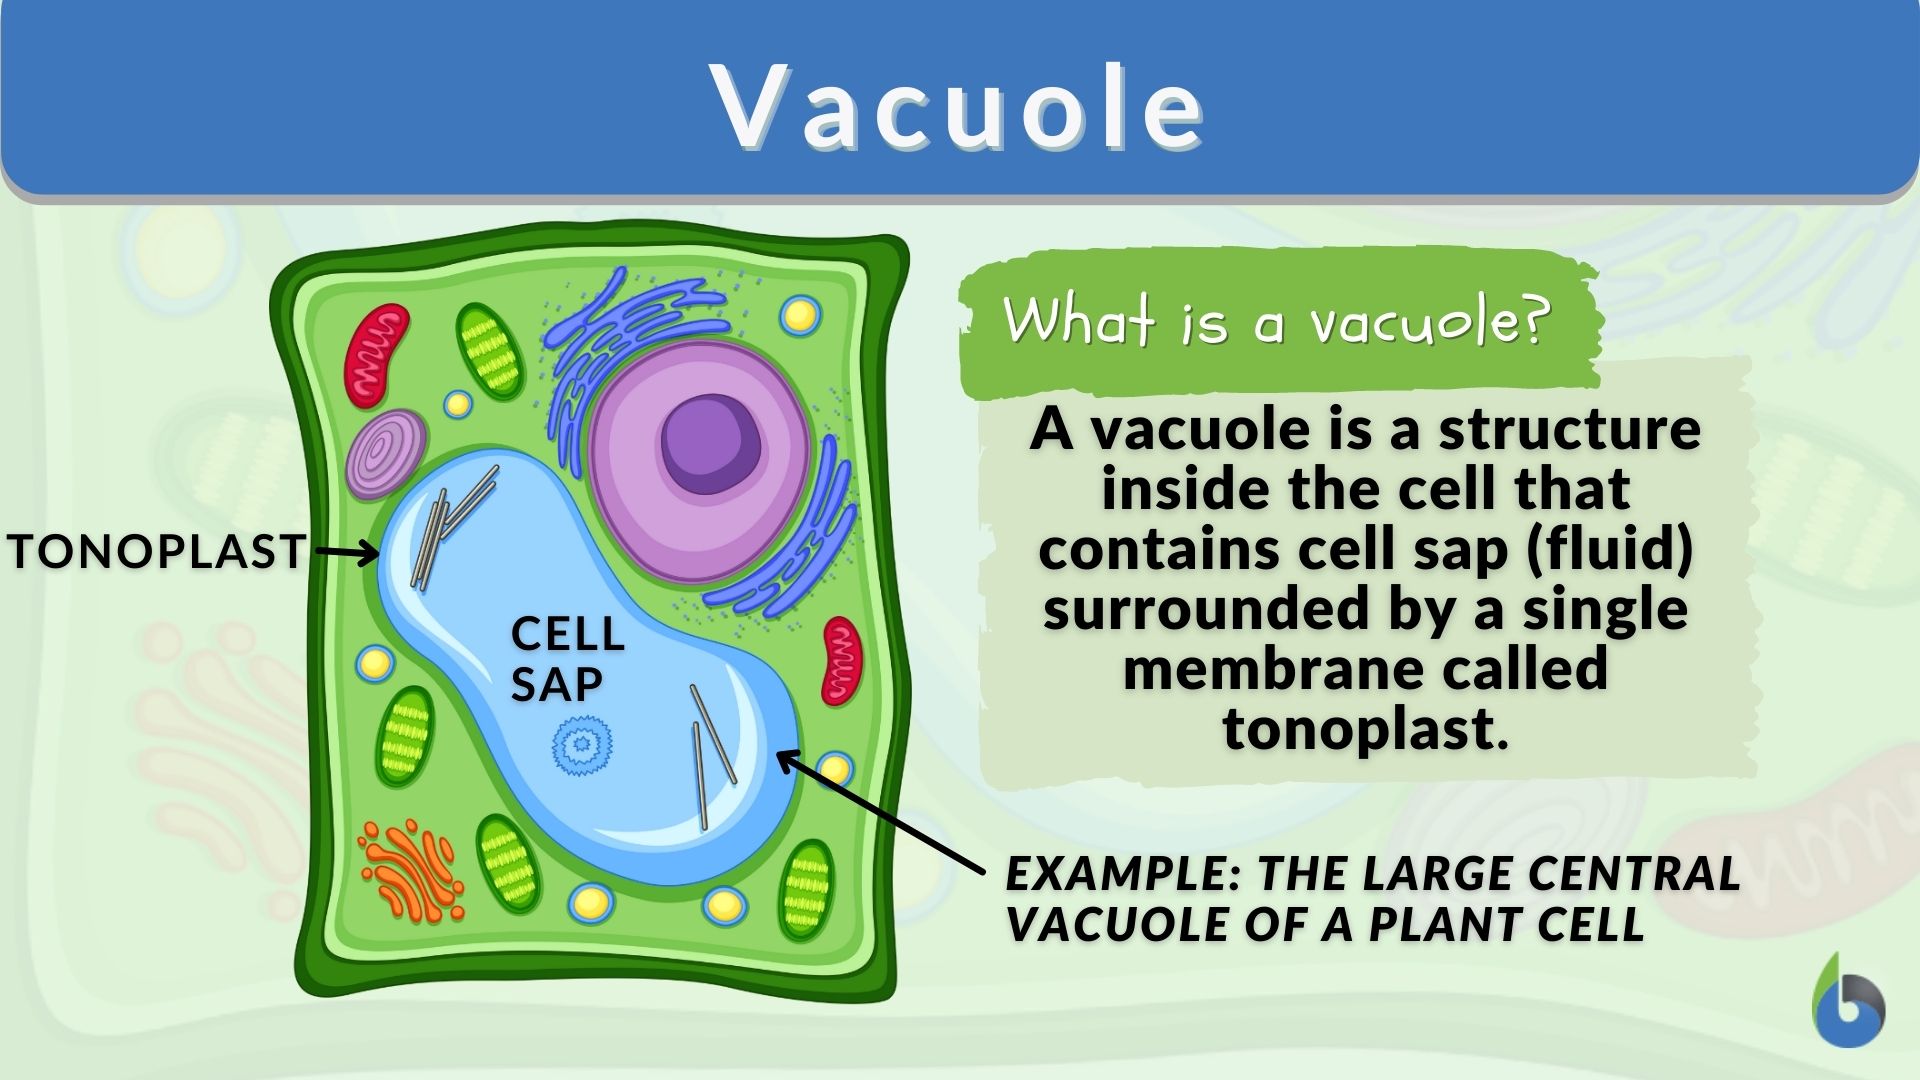 Vacuole - Definition and Examples - Biology Online Dictionary